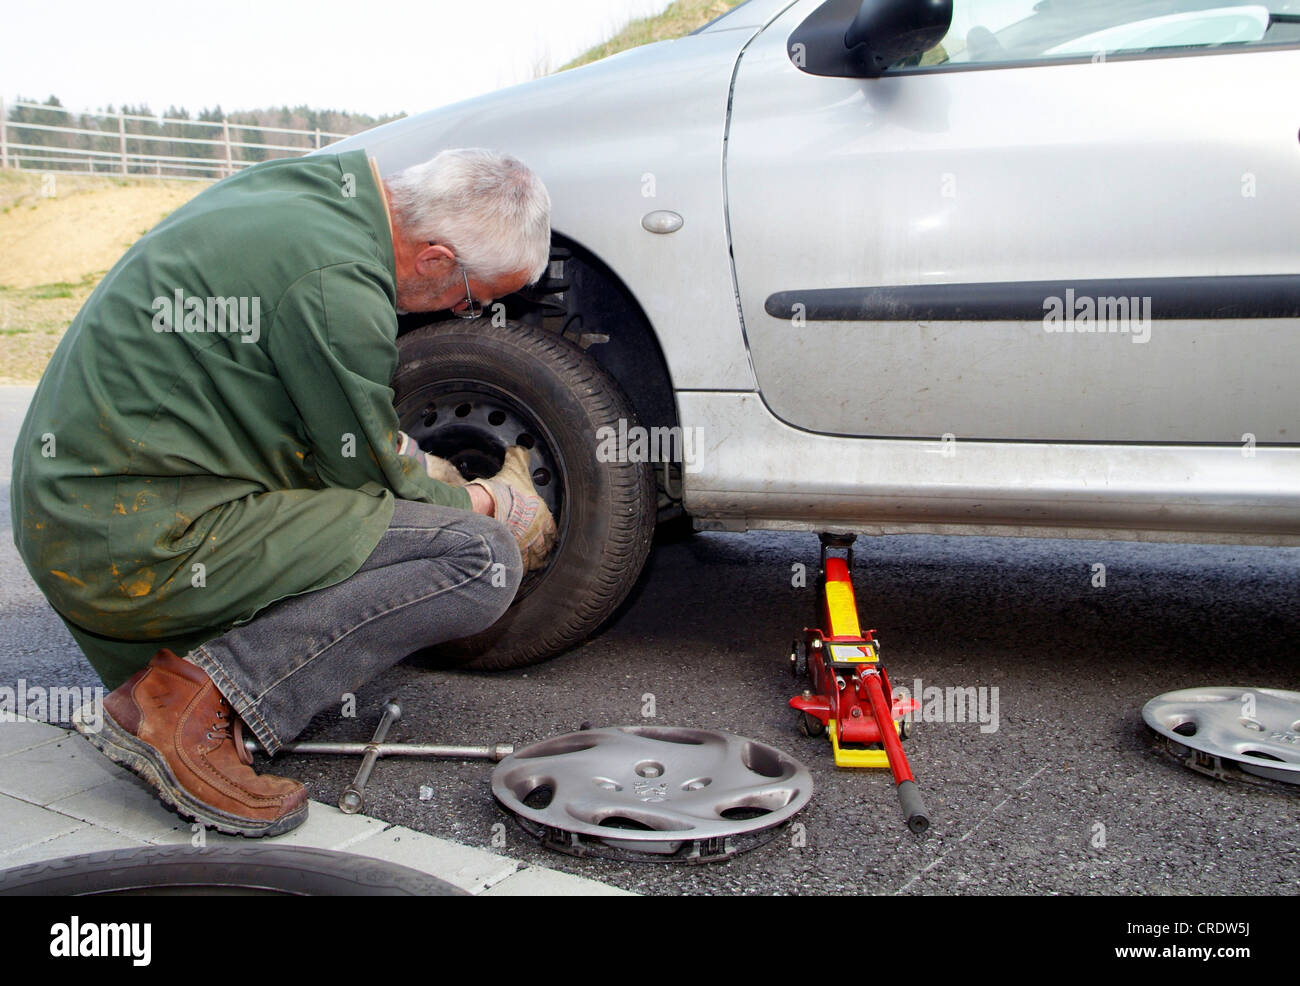 man during tire change Stock Photo